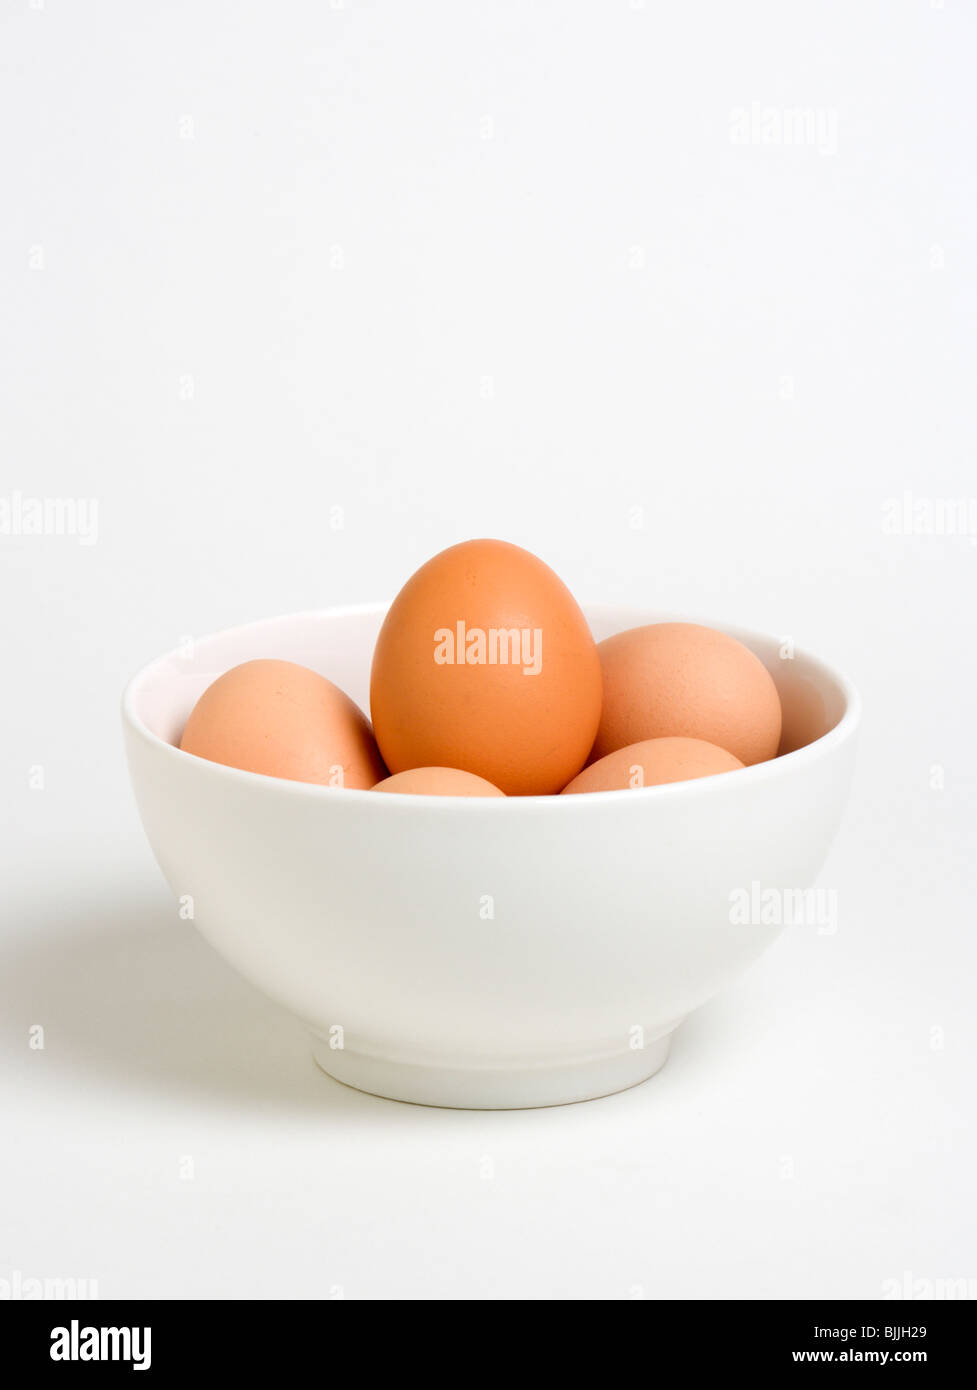 Food, Uncooked, Eggs, Free range eggs in a bowl on a white background. Stock Photo